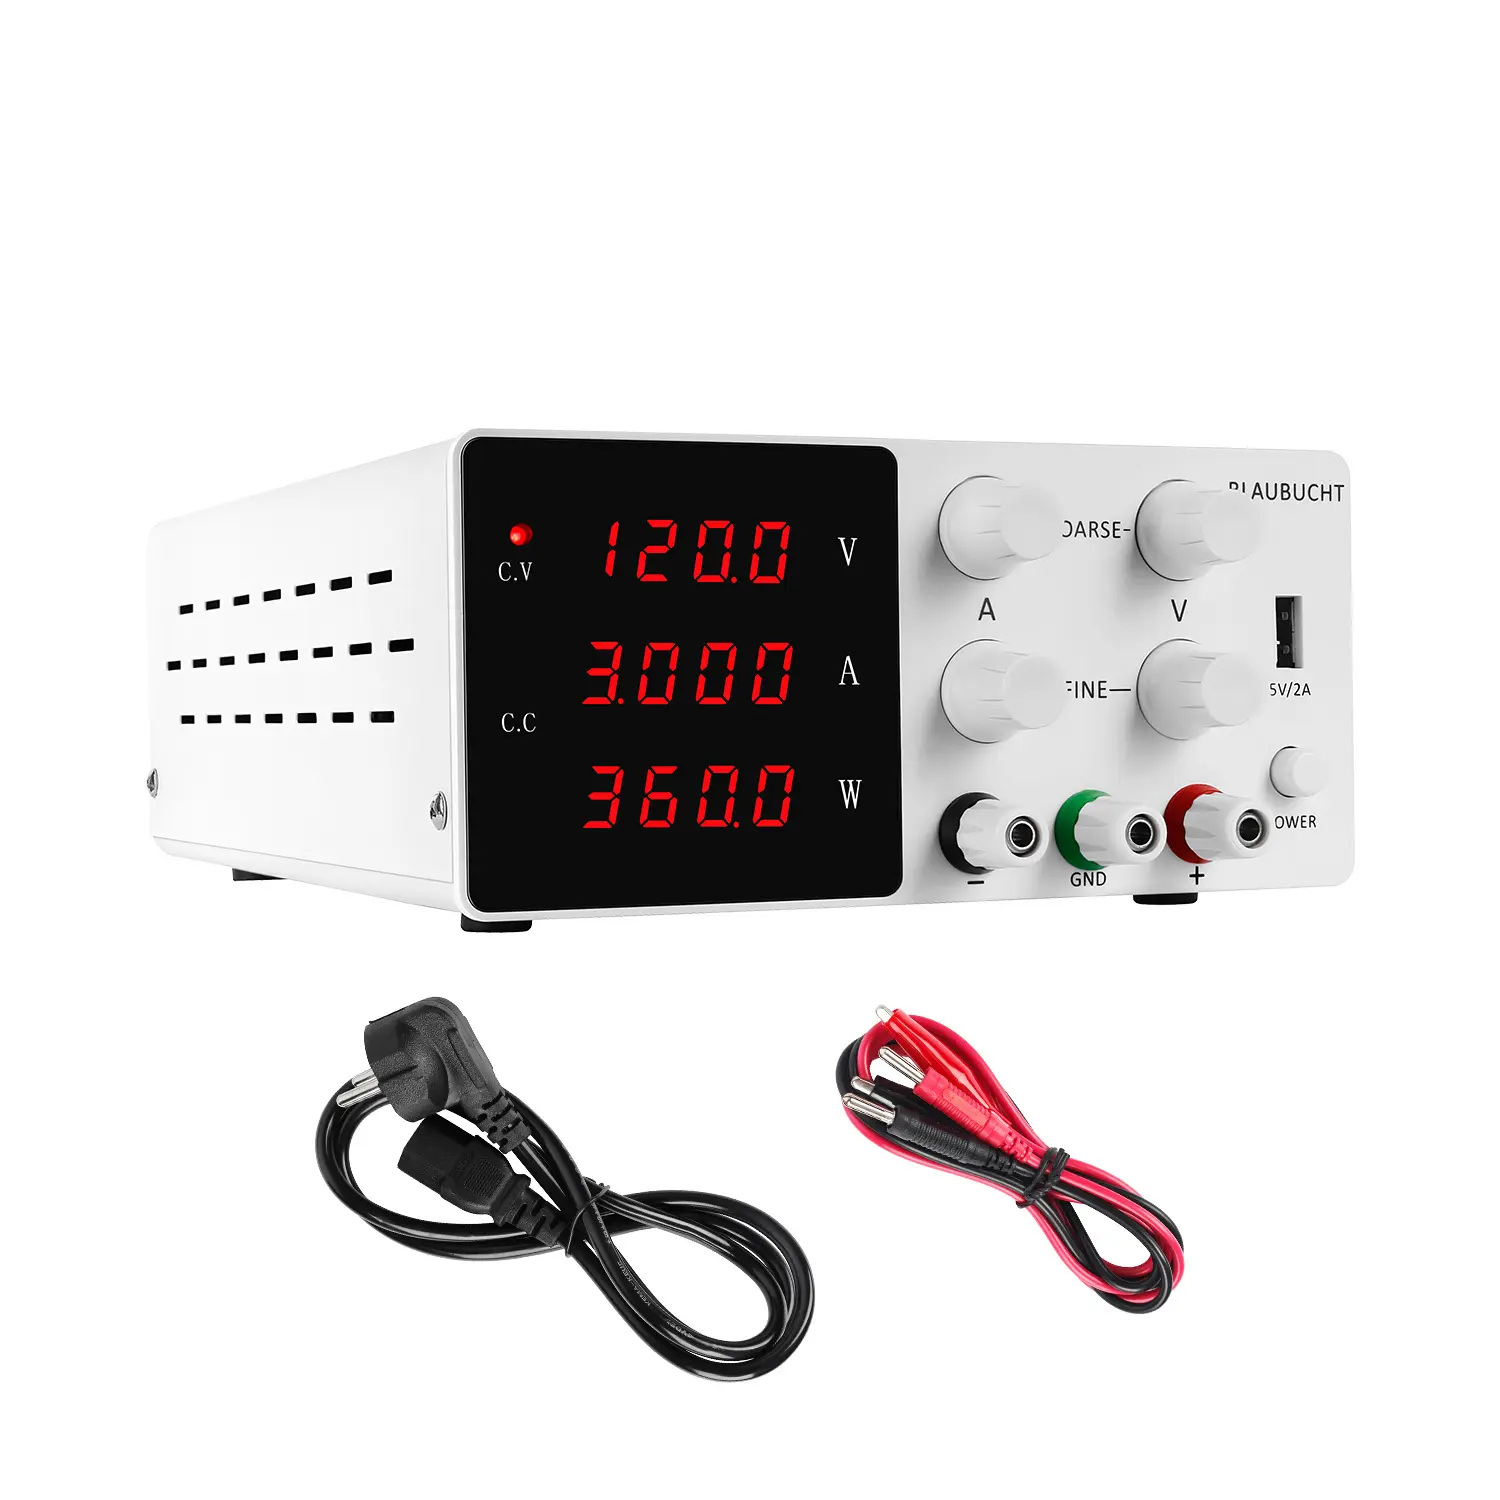 SPS-W1203 120V 3A DC Variable Power Supply Adjustable Switching Power Source for School Teaching 3 Set Digital Display